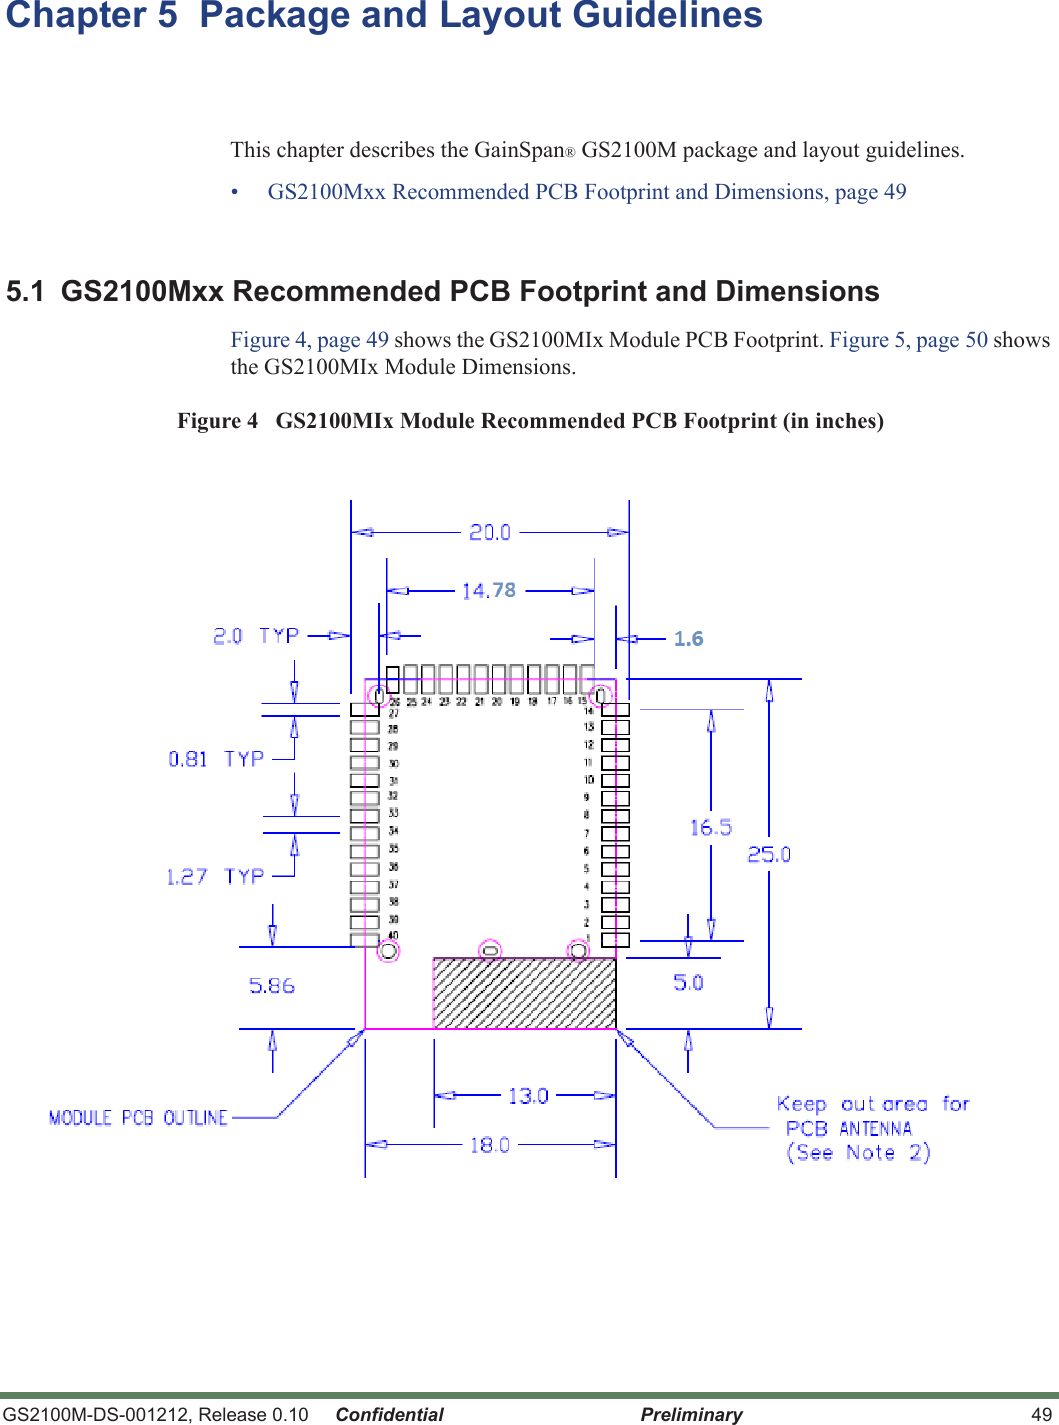 GS2100M-DS-001212, Release 0.10     Confidential Preliminary 49Chapter 5  Package and Layout GuidelinesThis chapter describes the GainSpan® GS2100M package and layout guidelines.• GS2100Mxx Recommended PCB Footprint and Dimensions, page 495.1  GS2100Mxx Recommended PCB Footprint and DimensionsFigure 4, page 49 shows the GS2100MIx Module PCB Footprint. Figure 5, page 50 shows the GS2100MIx Module Dimensions.Figure 4   GS2100MIx Module Recommended PCB Footprint (in inches)